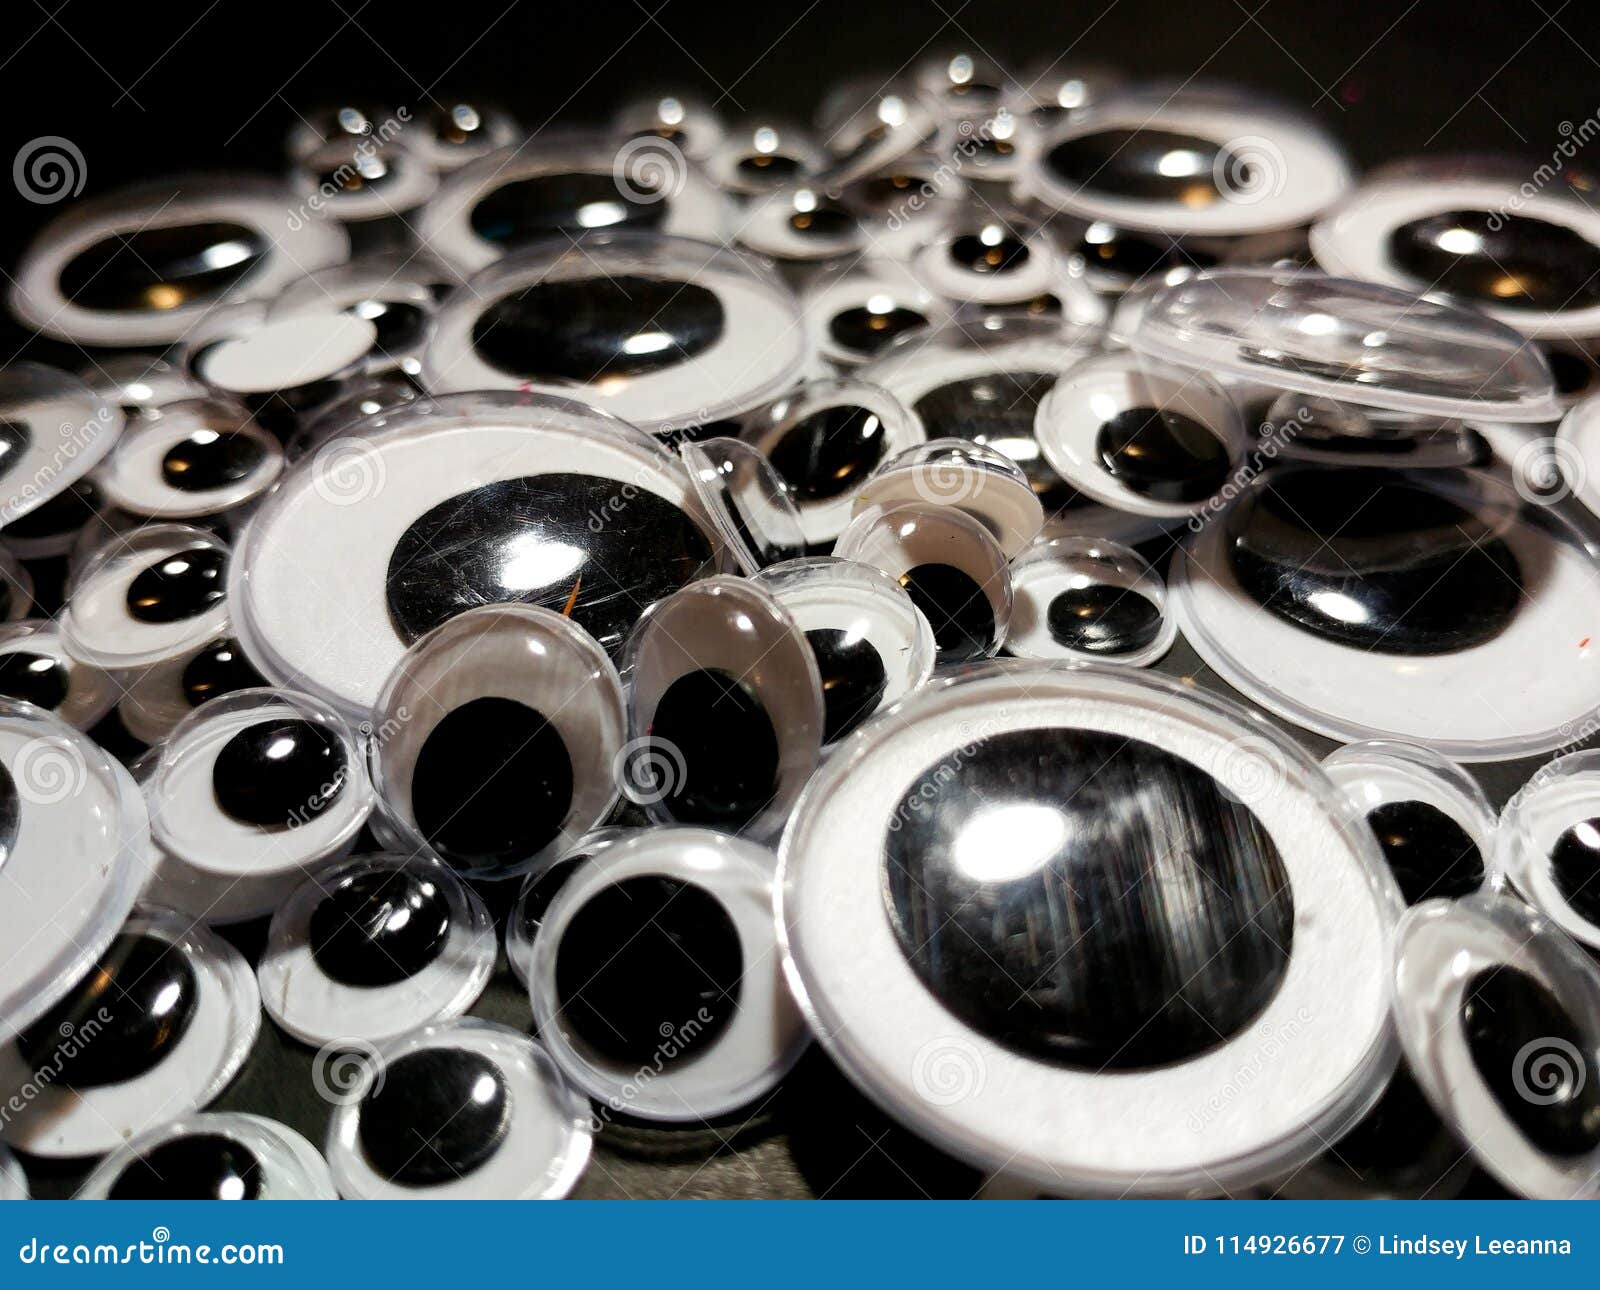 Googly eyes are small plastic craft supplies used to imitate eyeballs  isolated on white background., Stock image